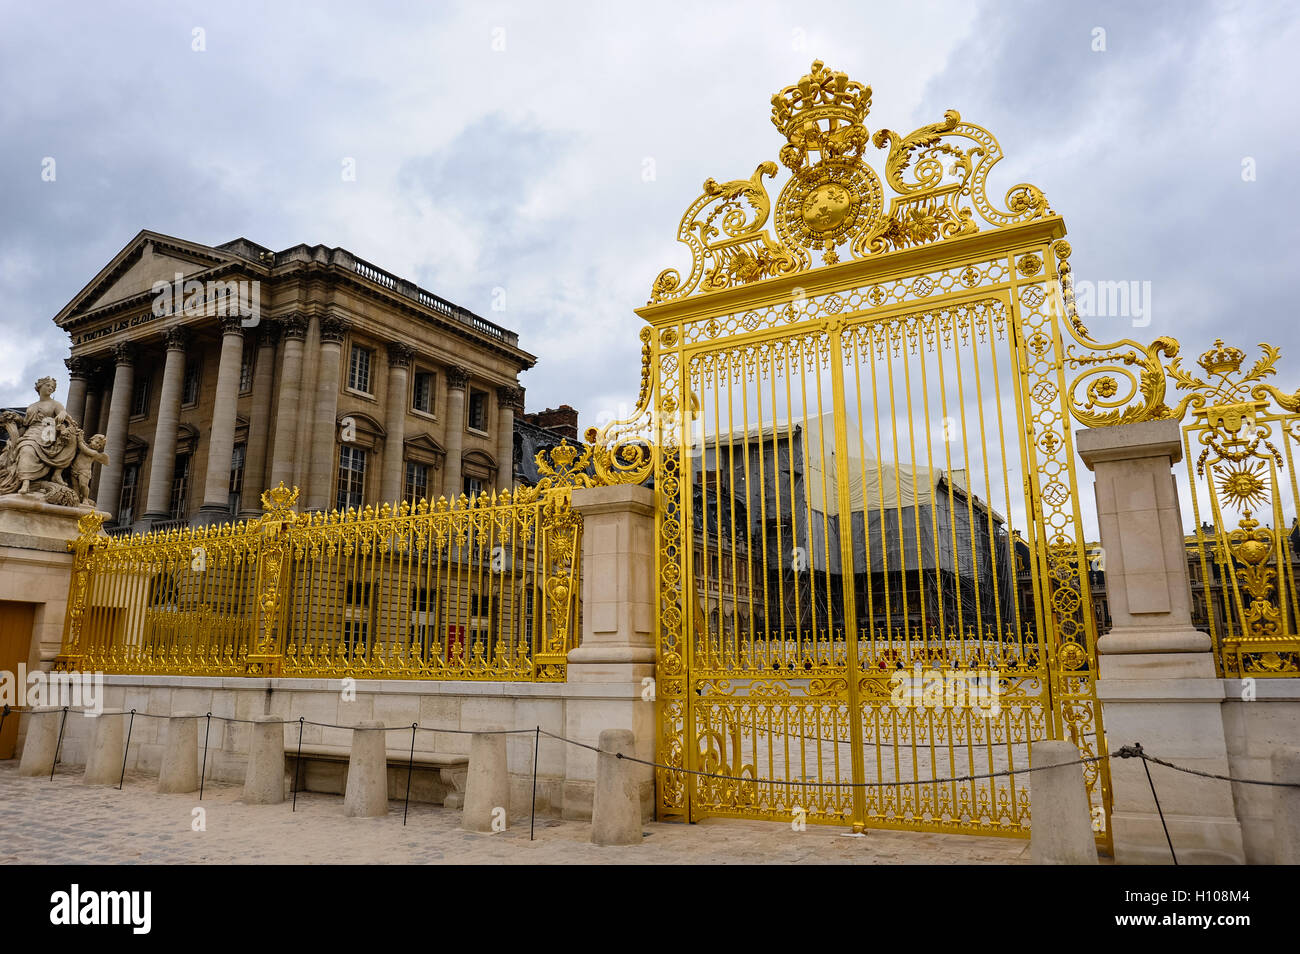 The Palace of Versailles, or simply Versailles, is a royal château close to Paris, France. Pavillon Gabriel in the background. Stock Photo